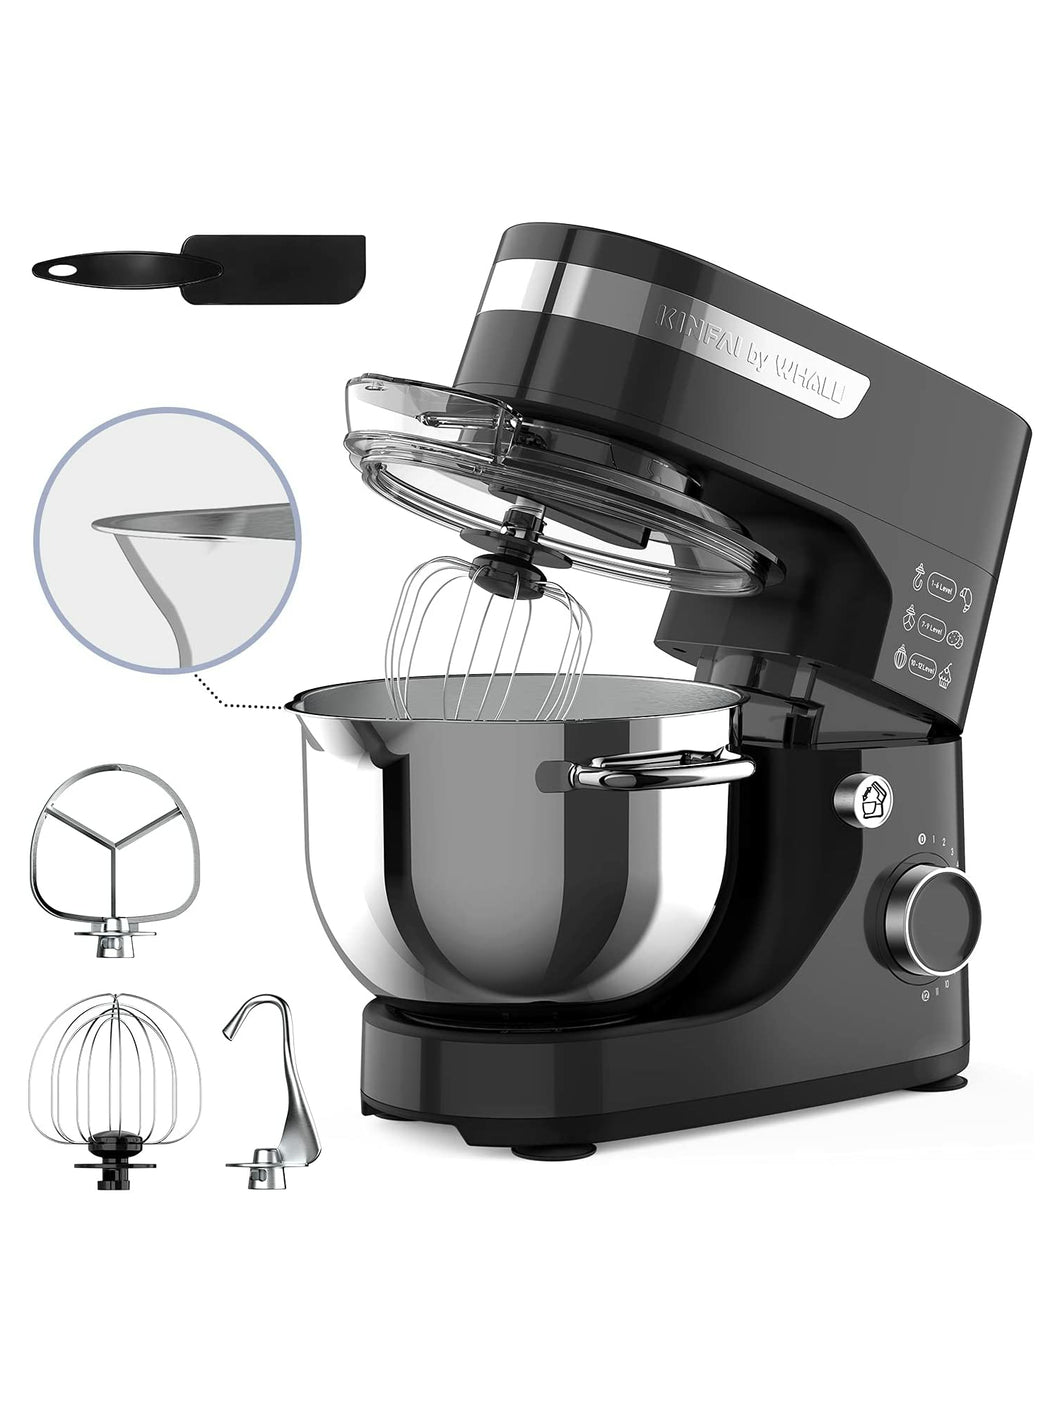 Whall Kinfai Electric Kitchen Stand Mixer Machine with 4.5 Quart Bowl for Baking, Dough, Cooking, Black